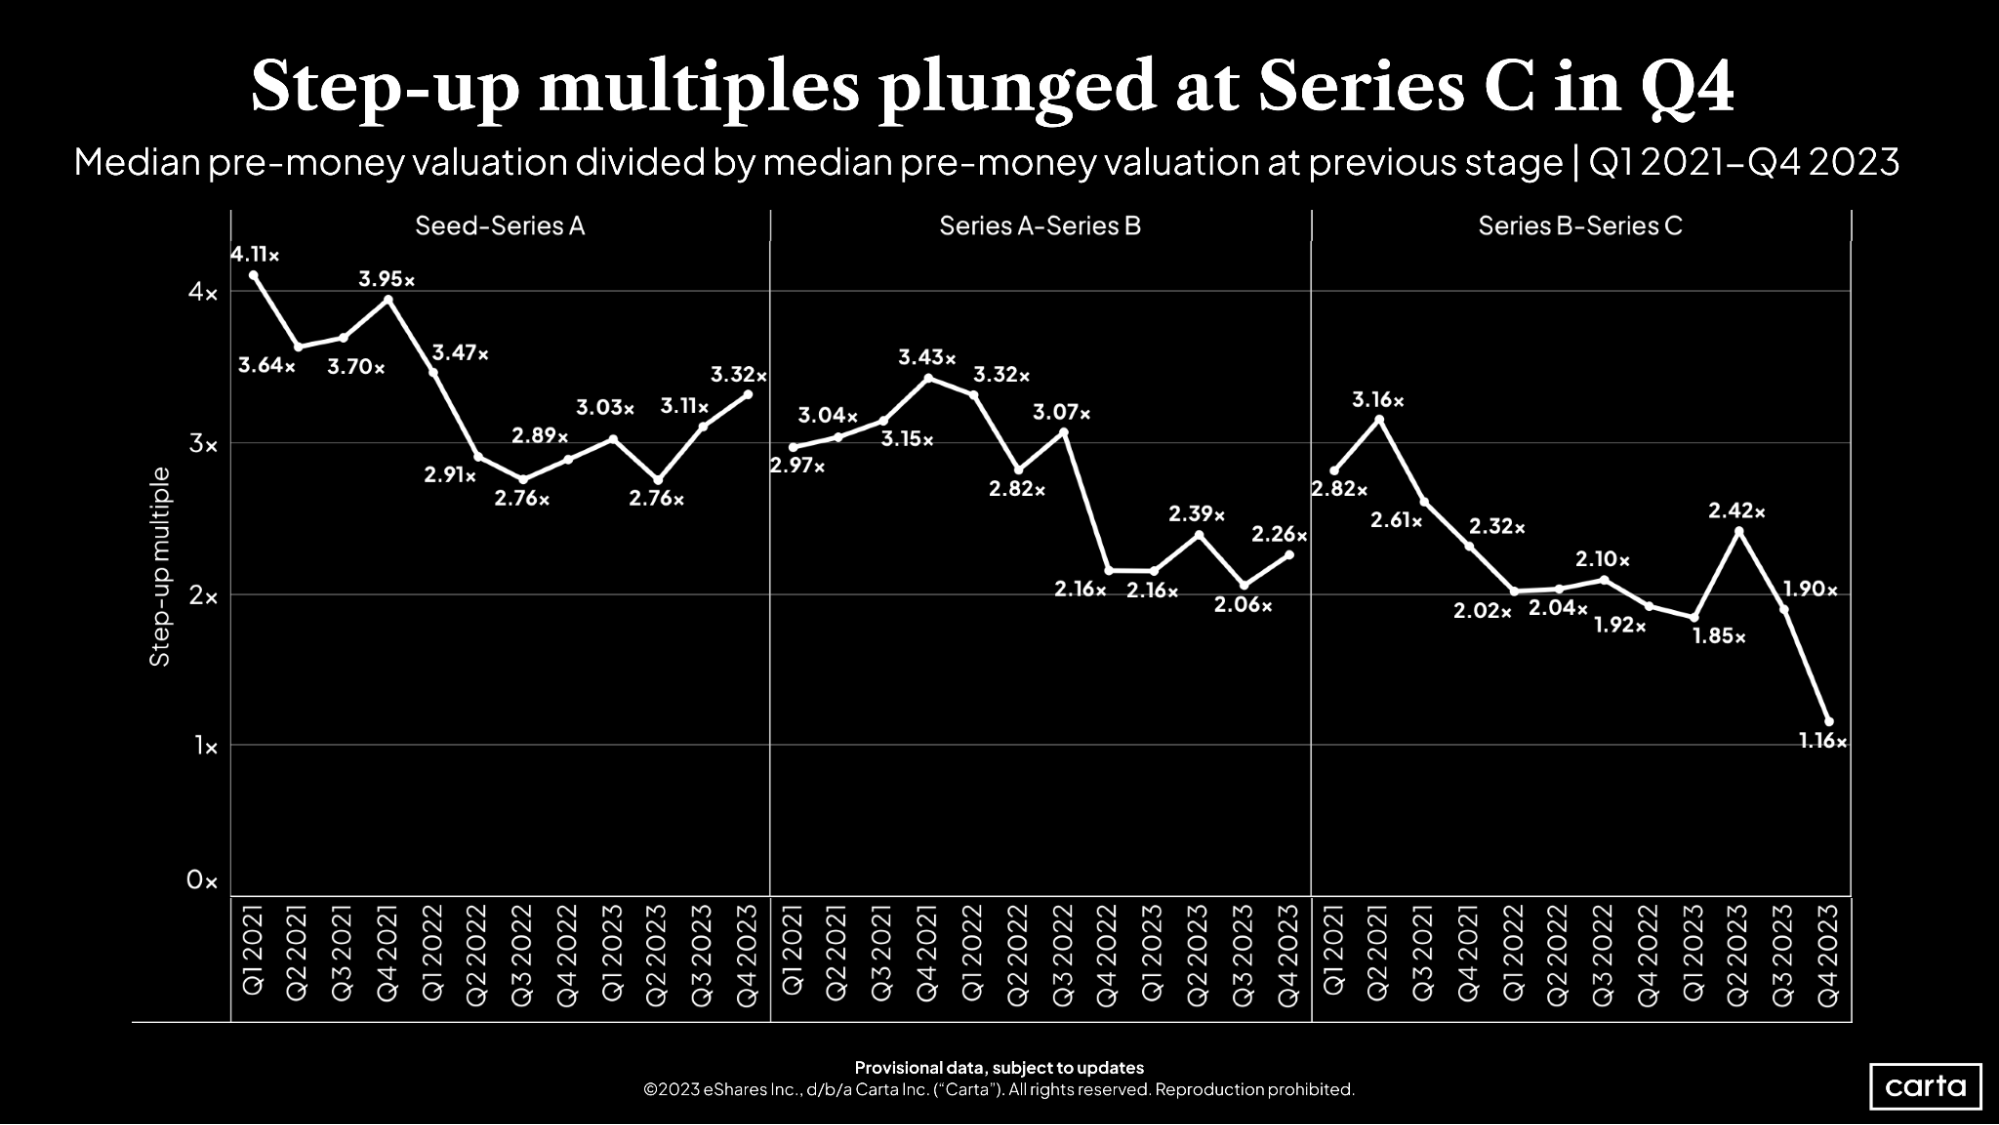 Step-up multiples plunged at Series C in 04